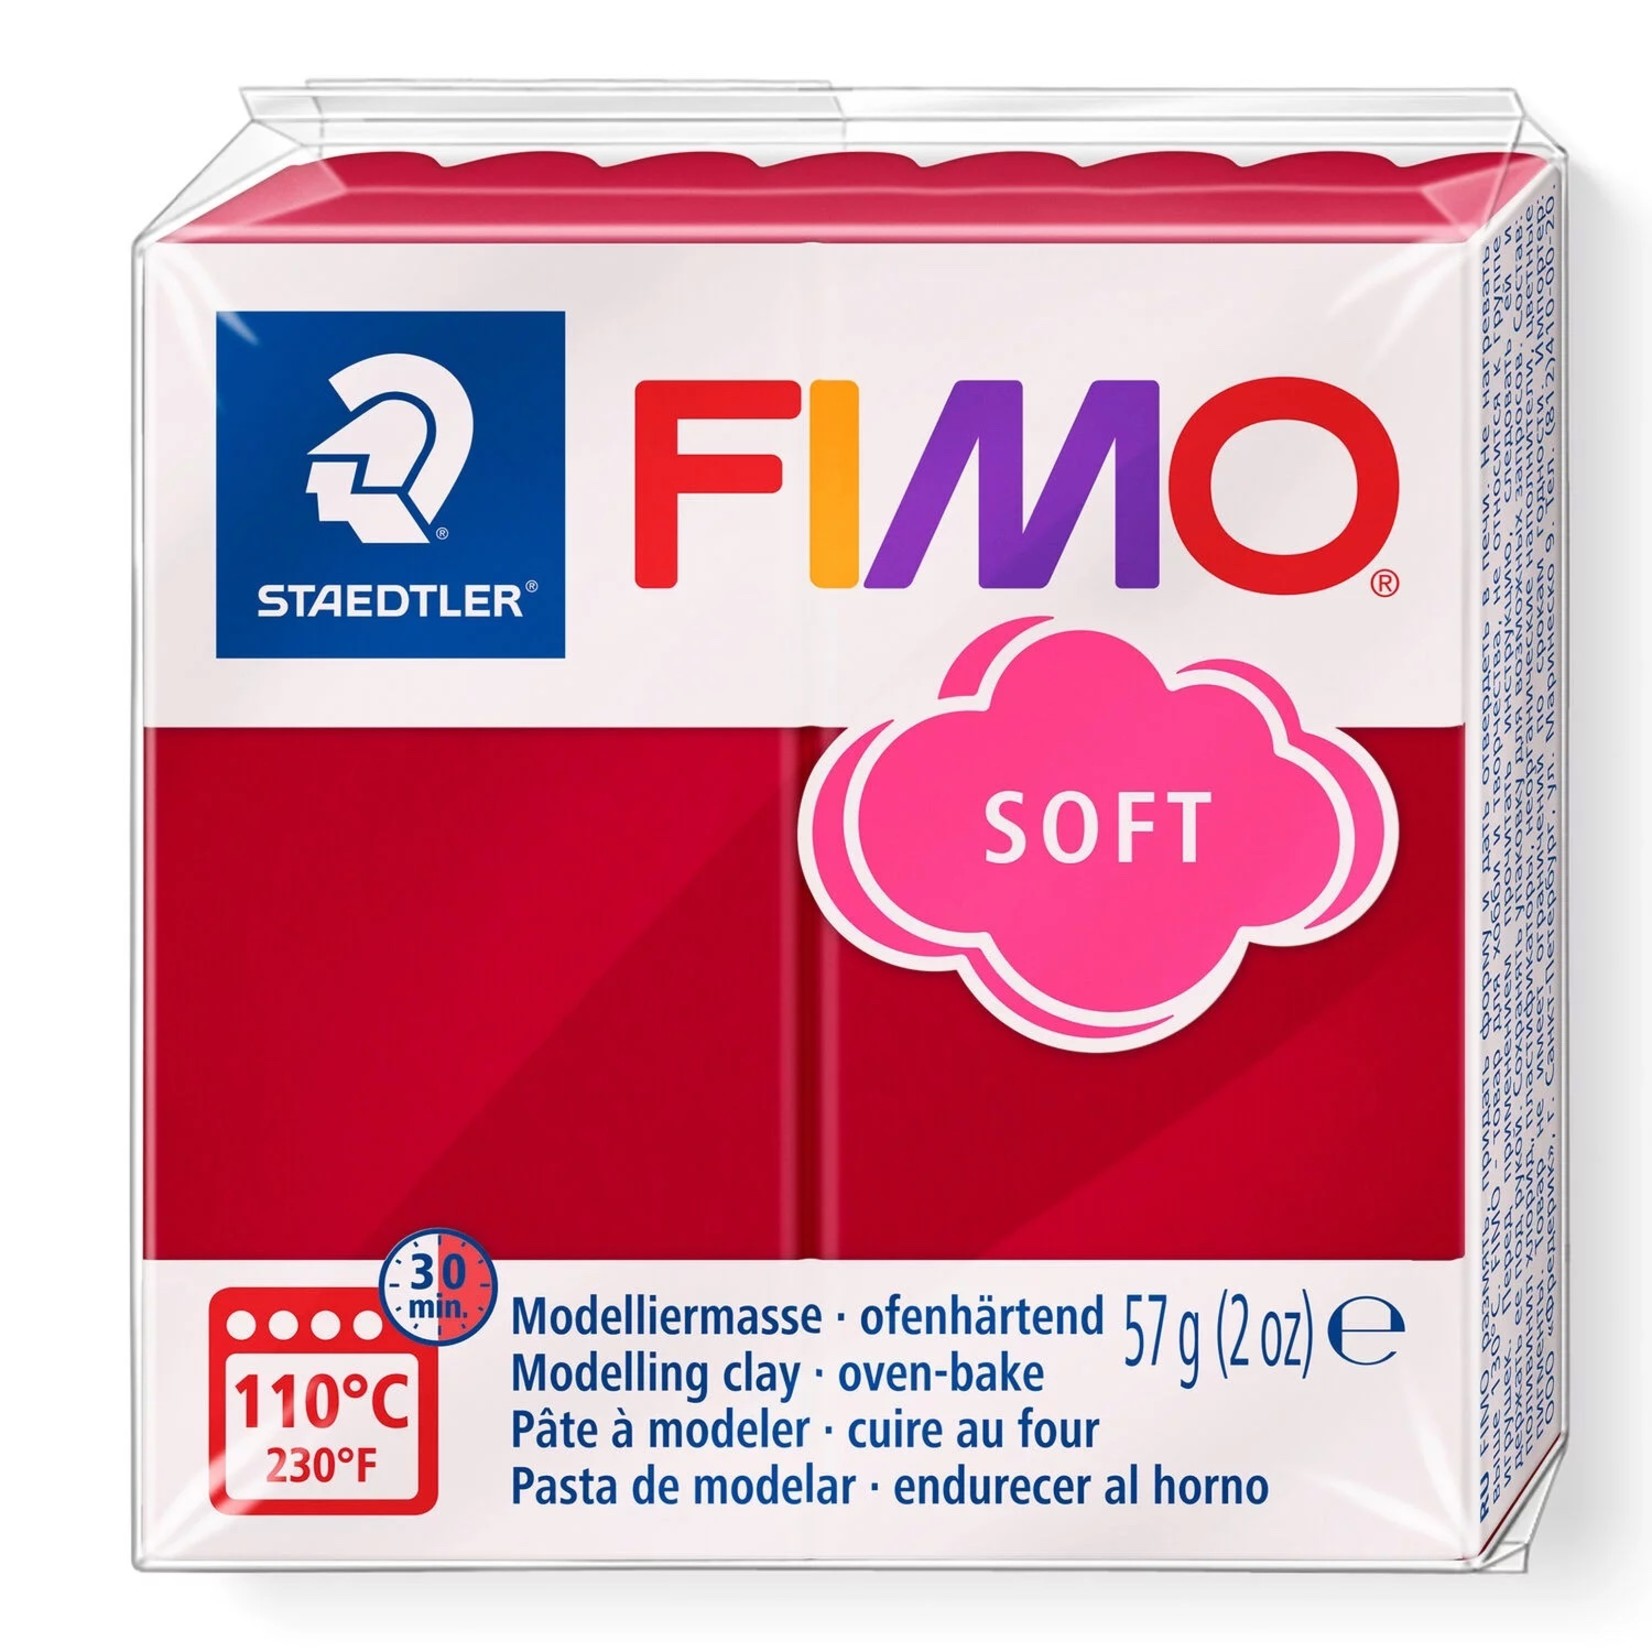 STAEDTLER FIMO SOFT 26 CHERRY RED